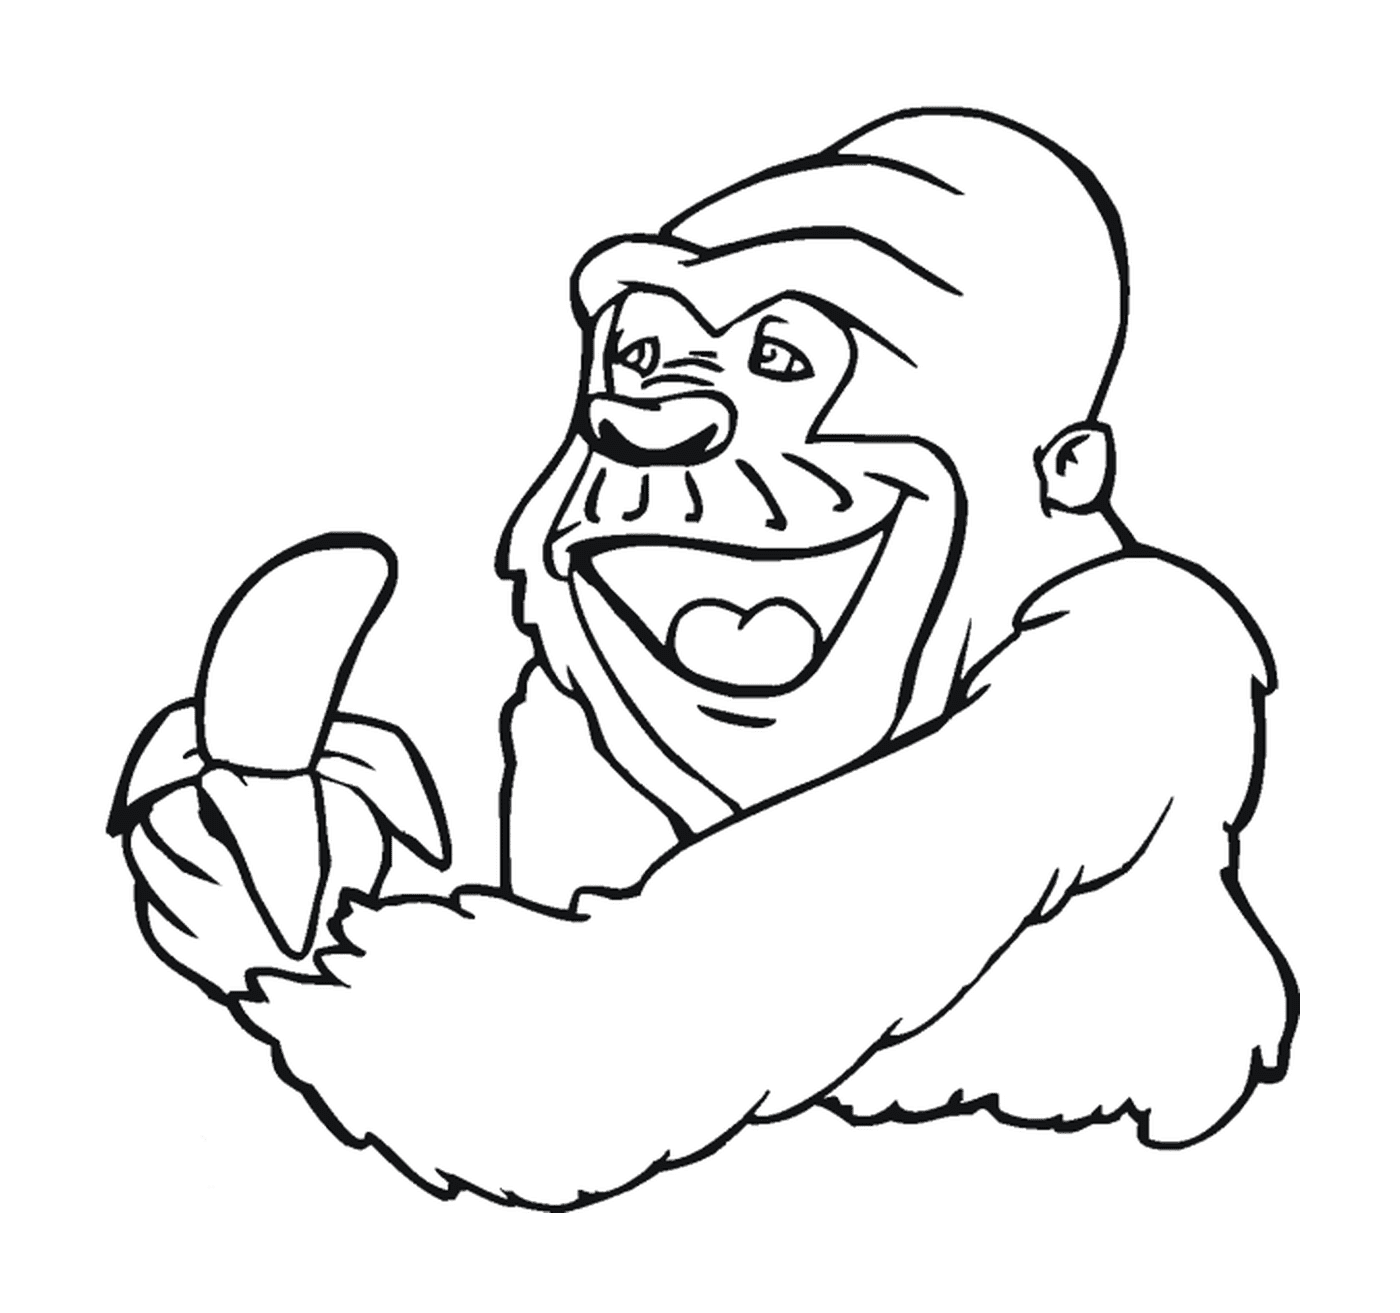  Gorilla dad and monkey with a banana 